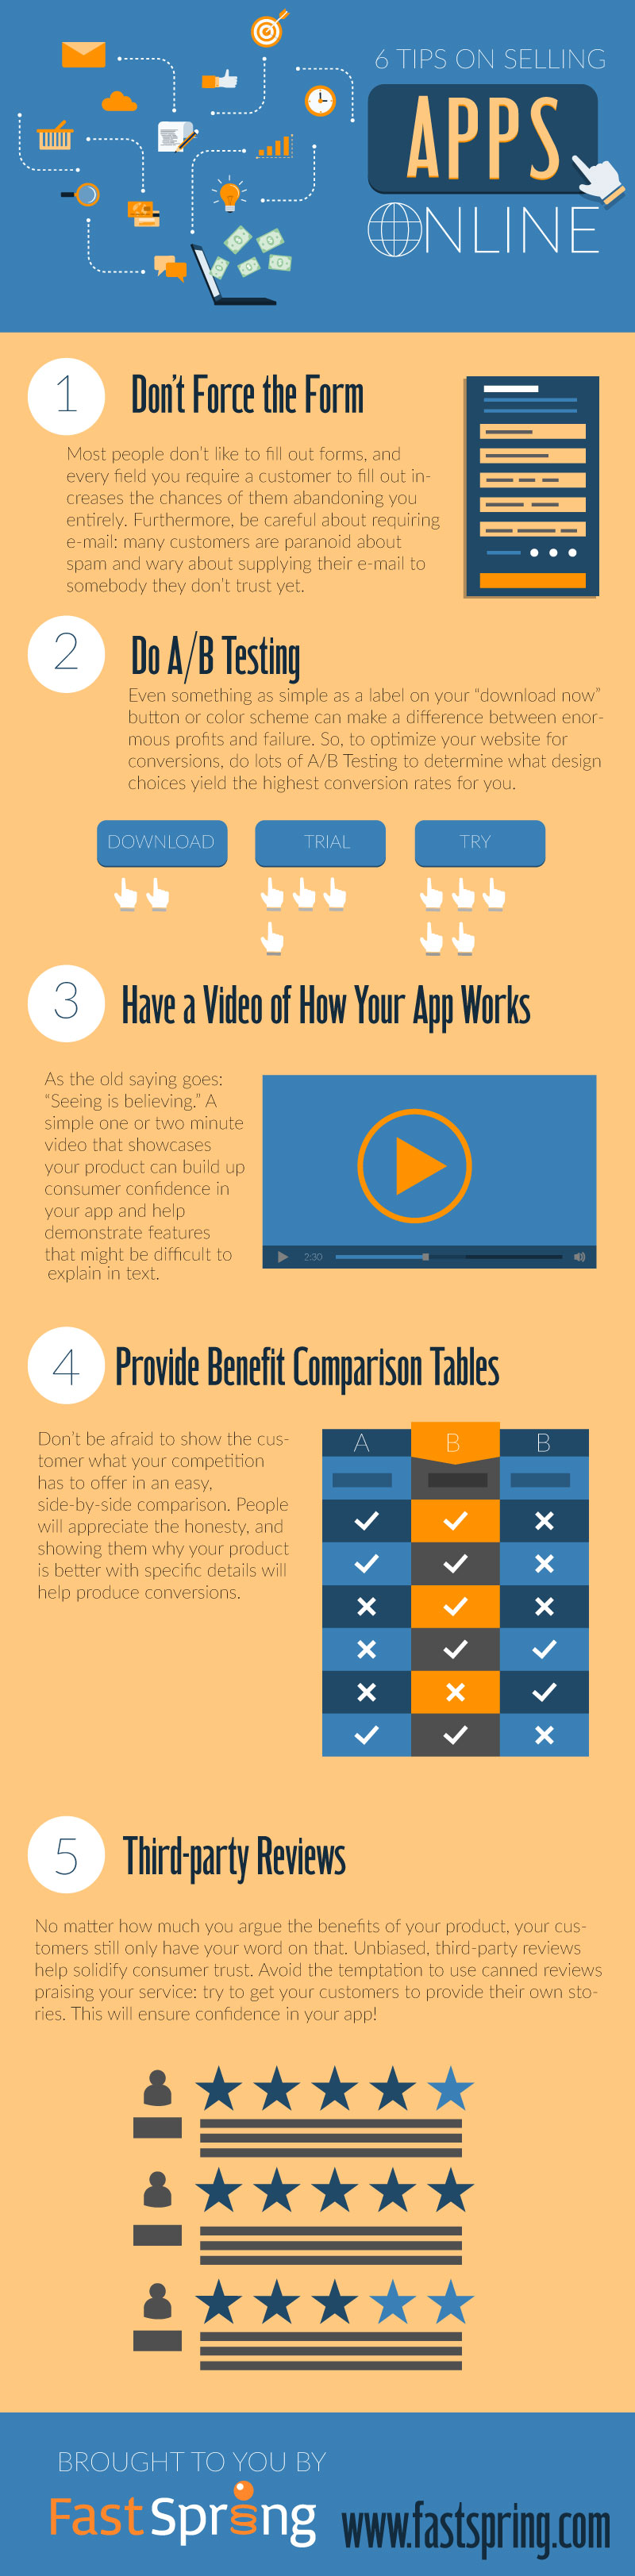 Infographic: 6 Tips for Selling Apps Online